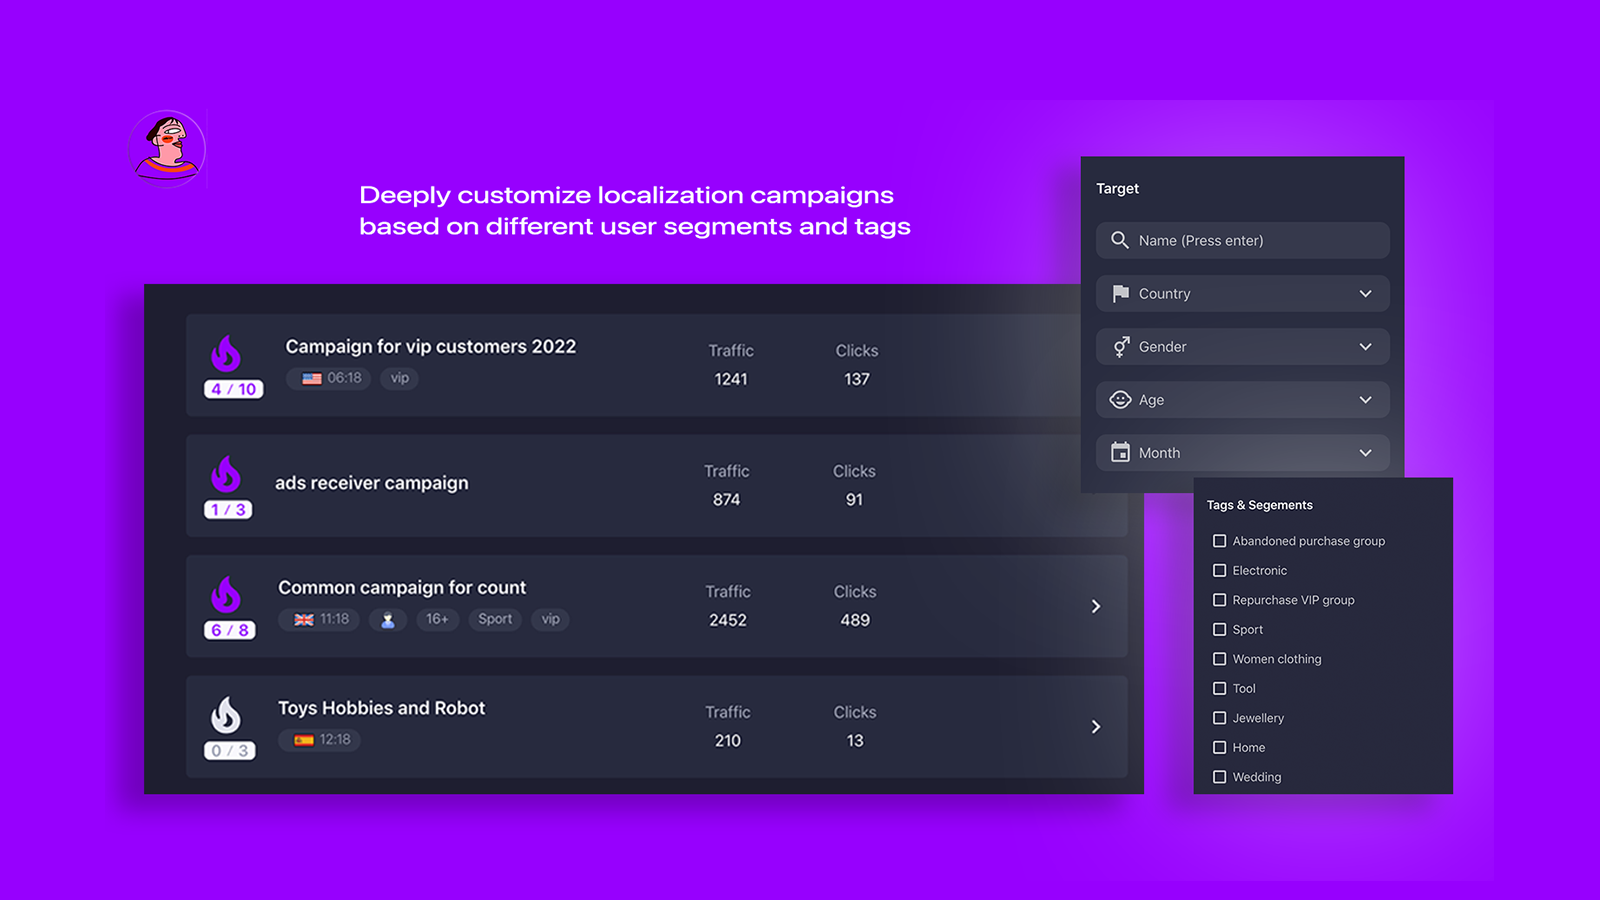 Deeply customize localization campaigns  based on different tags